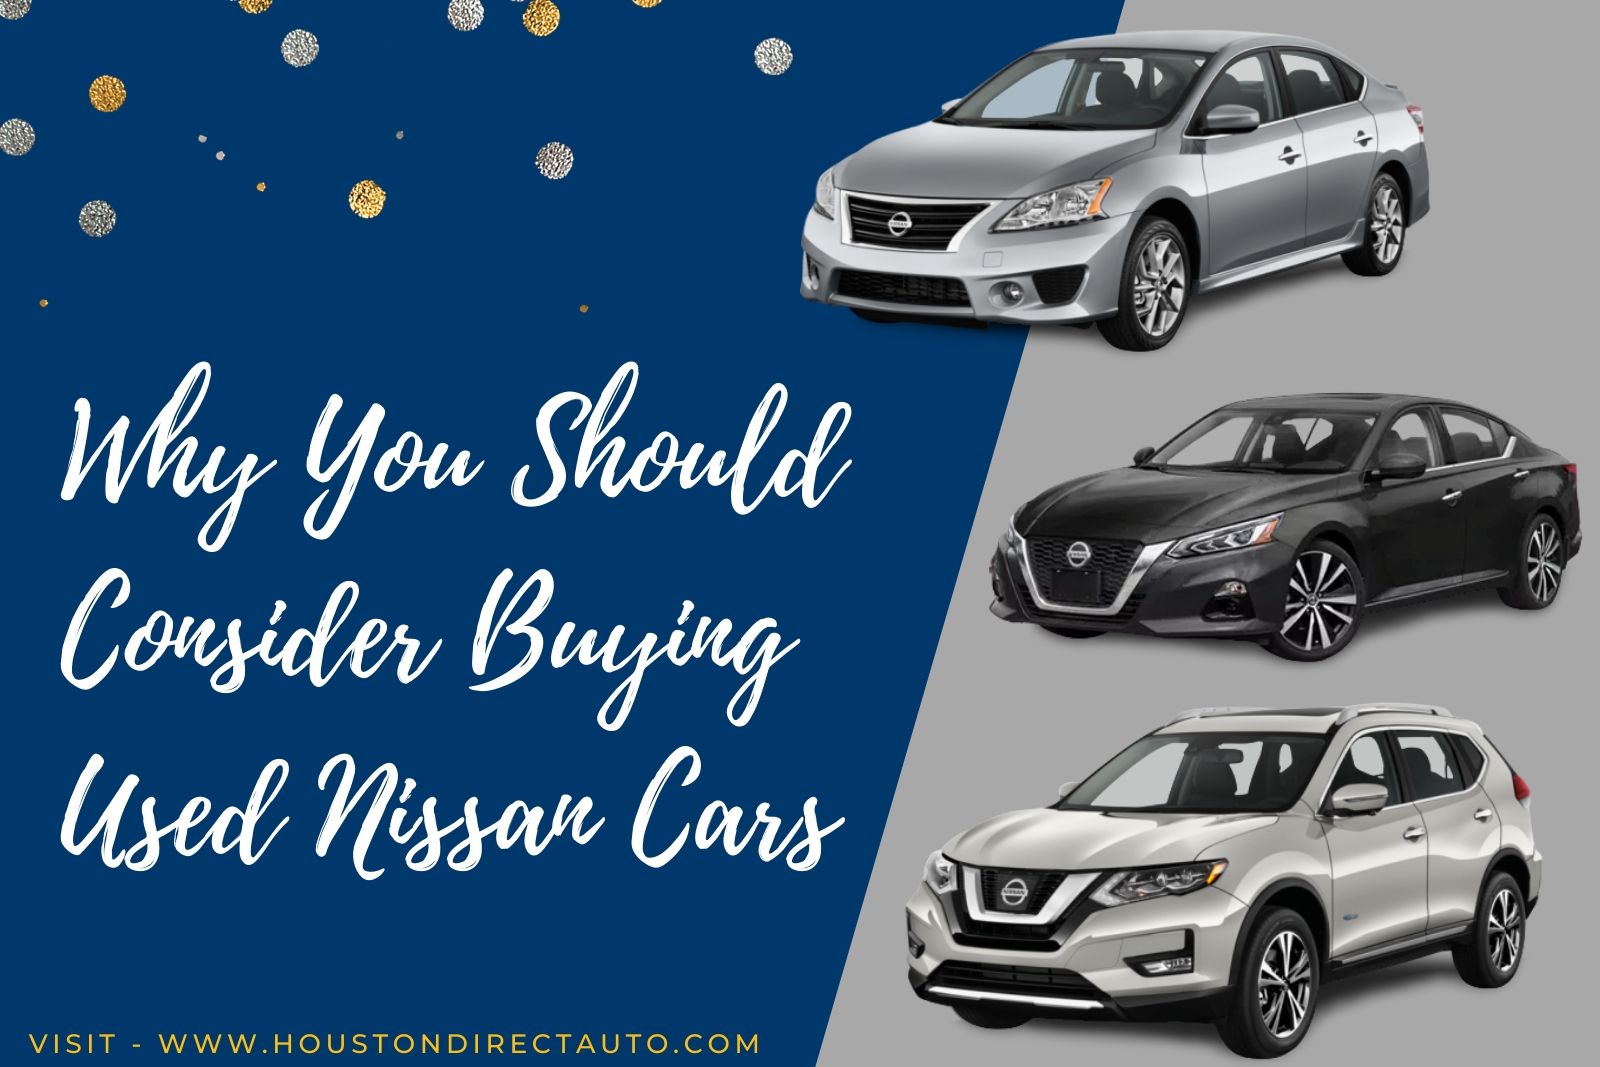 Why You Should Consider Buying Used Nissan Cars